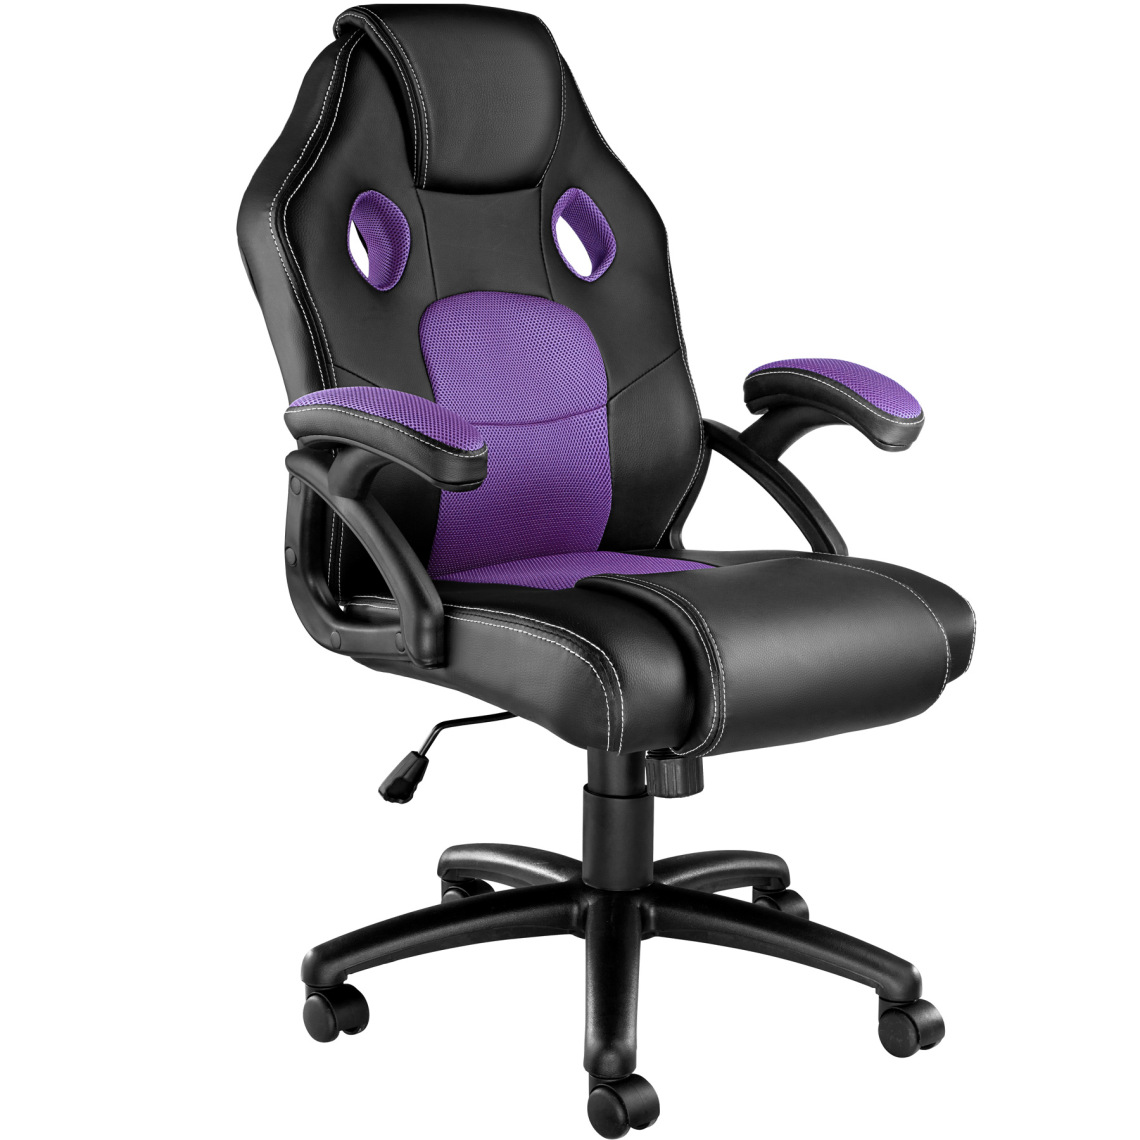 Tectake - Chaise gamer MIKE - noir/violet - Chaises